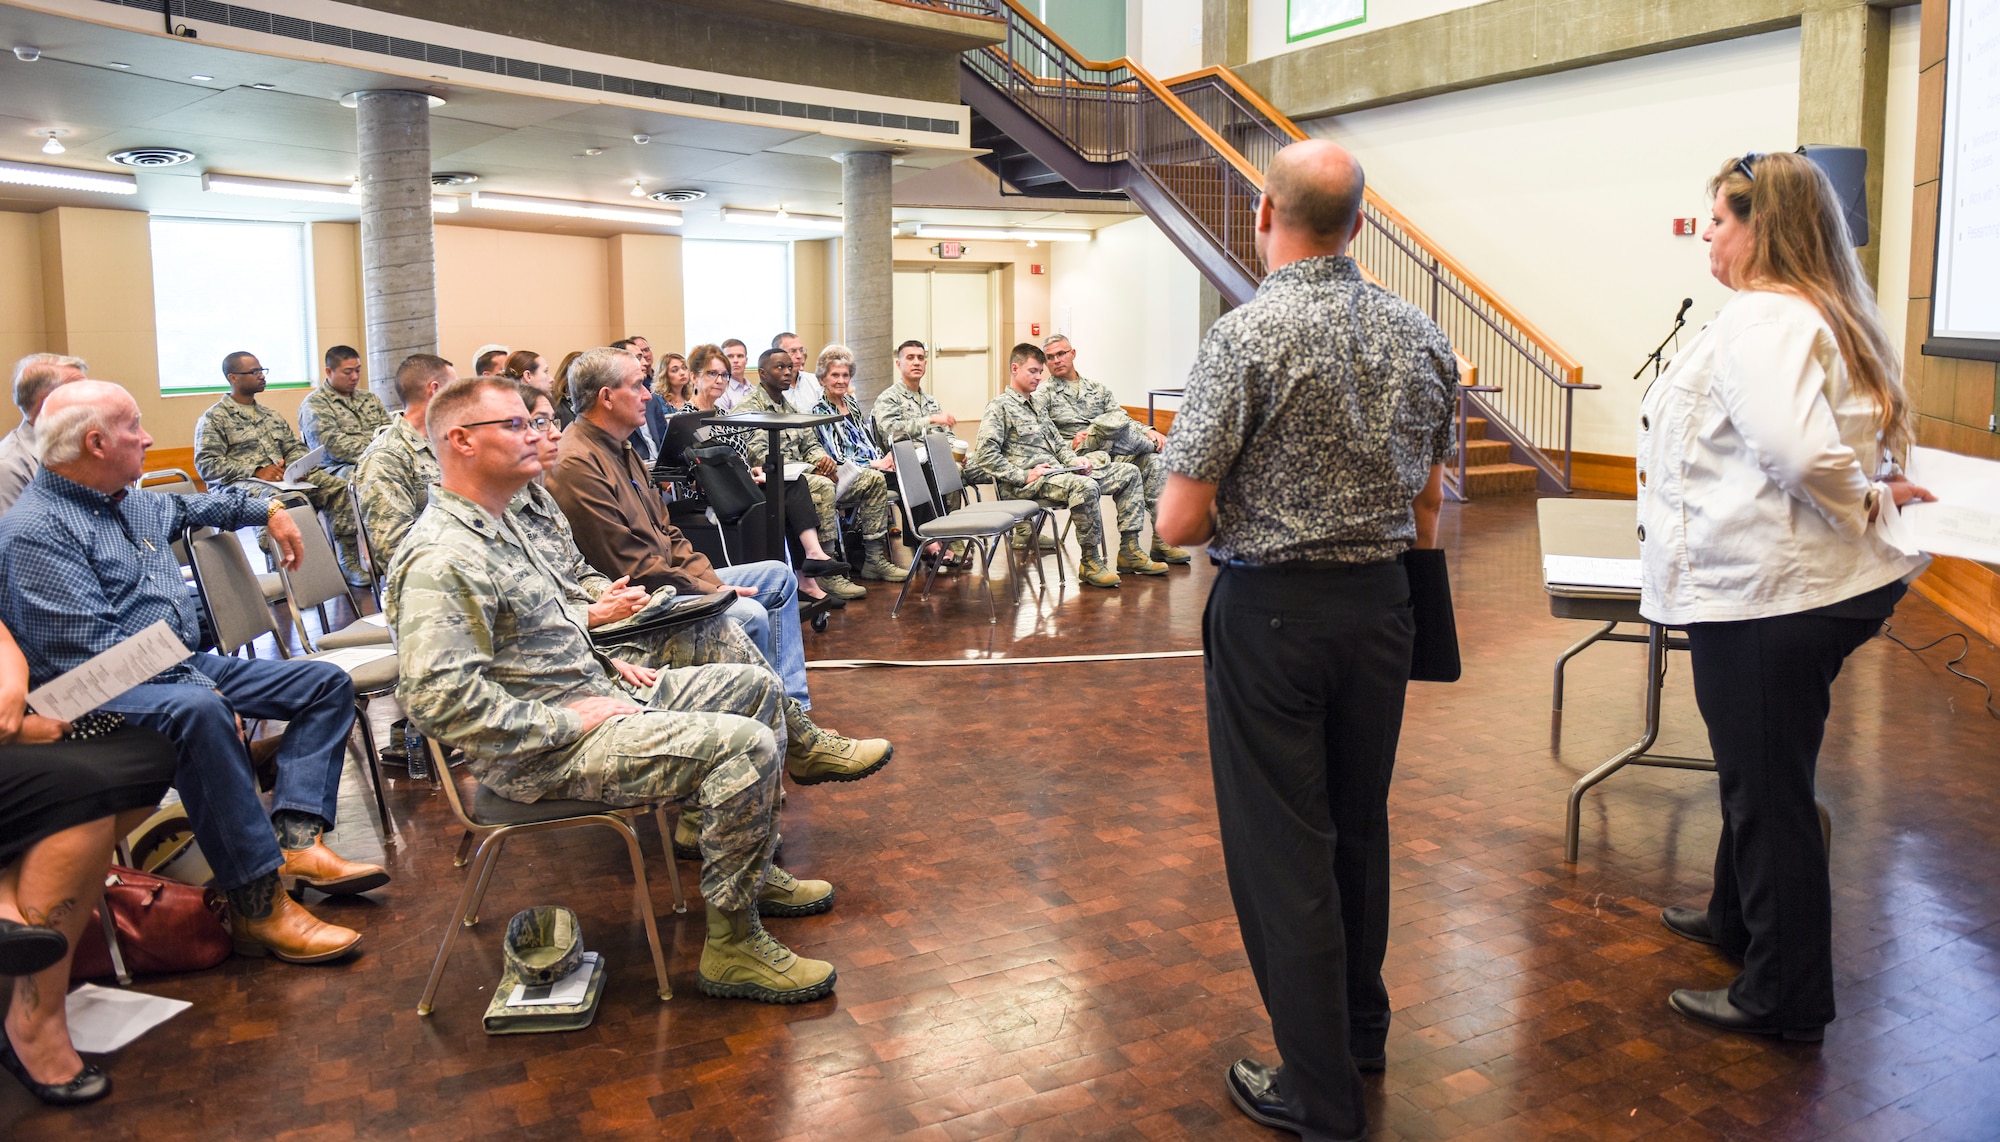 Members of the workforce development working group provide an update to military and civilian leaders during the quarterly partnership meeting held at the San Angelo Museum of Fine Arts, San Angelo, Texas, July 19, 2018. Topics addressed included better awareness and advertising for jobs on base and within the community (U.S. Air Force photo by Aryn Lockhart/Released)